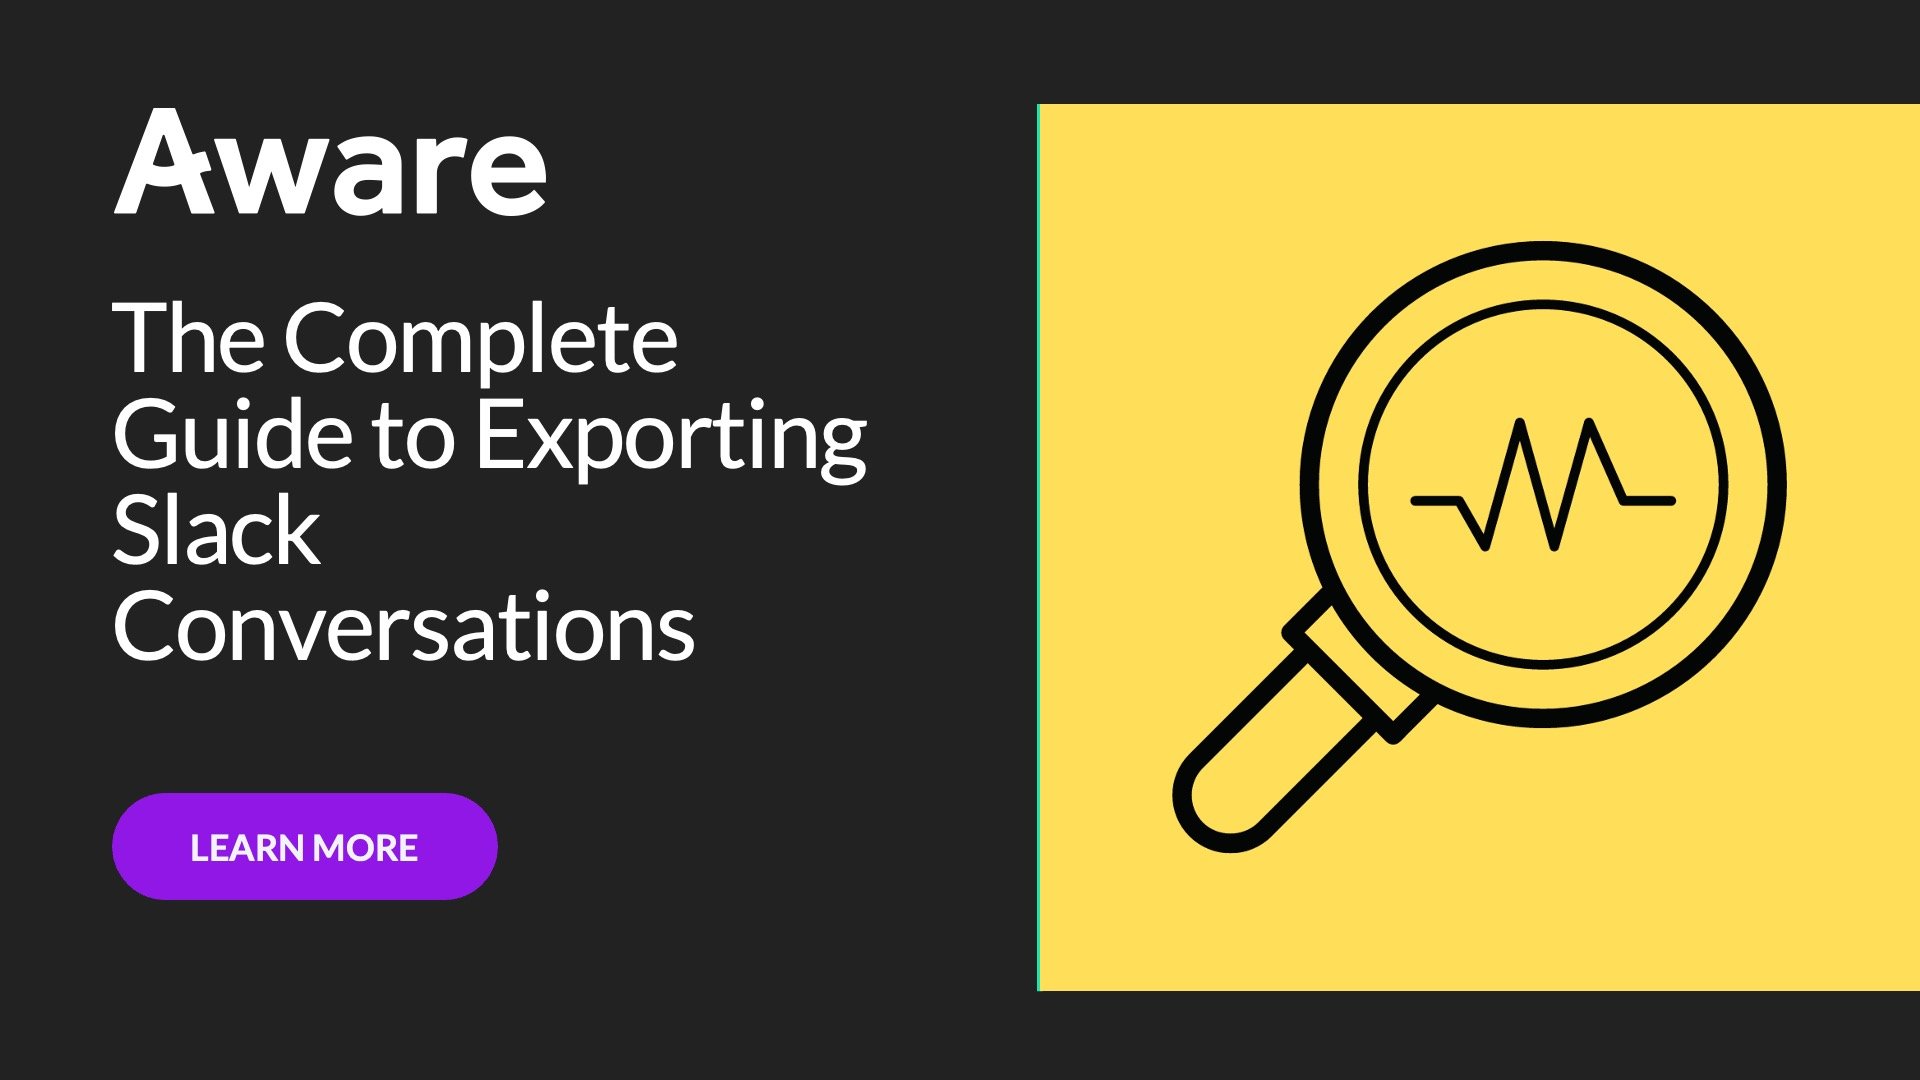 The Complete Guide to Exporting Slack Conversations